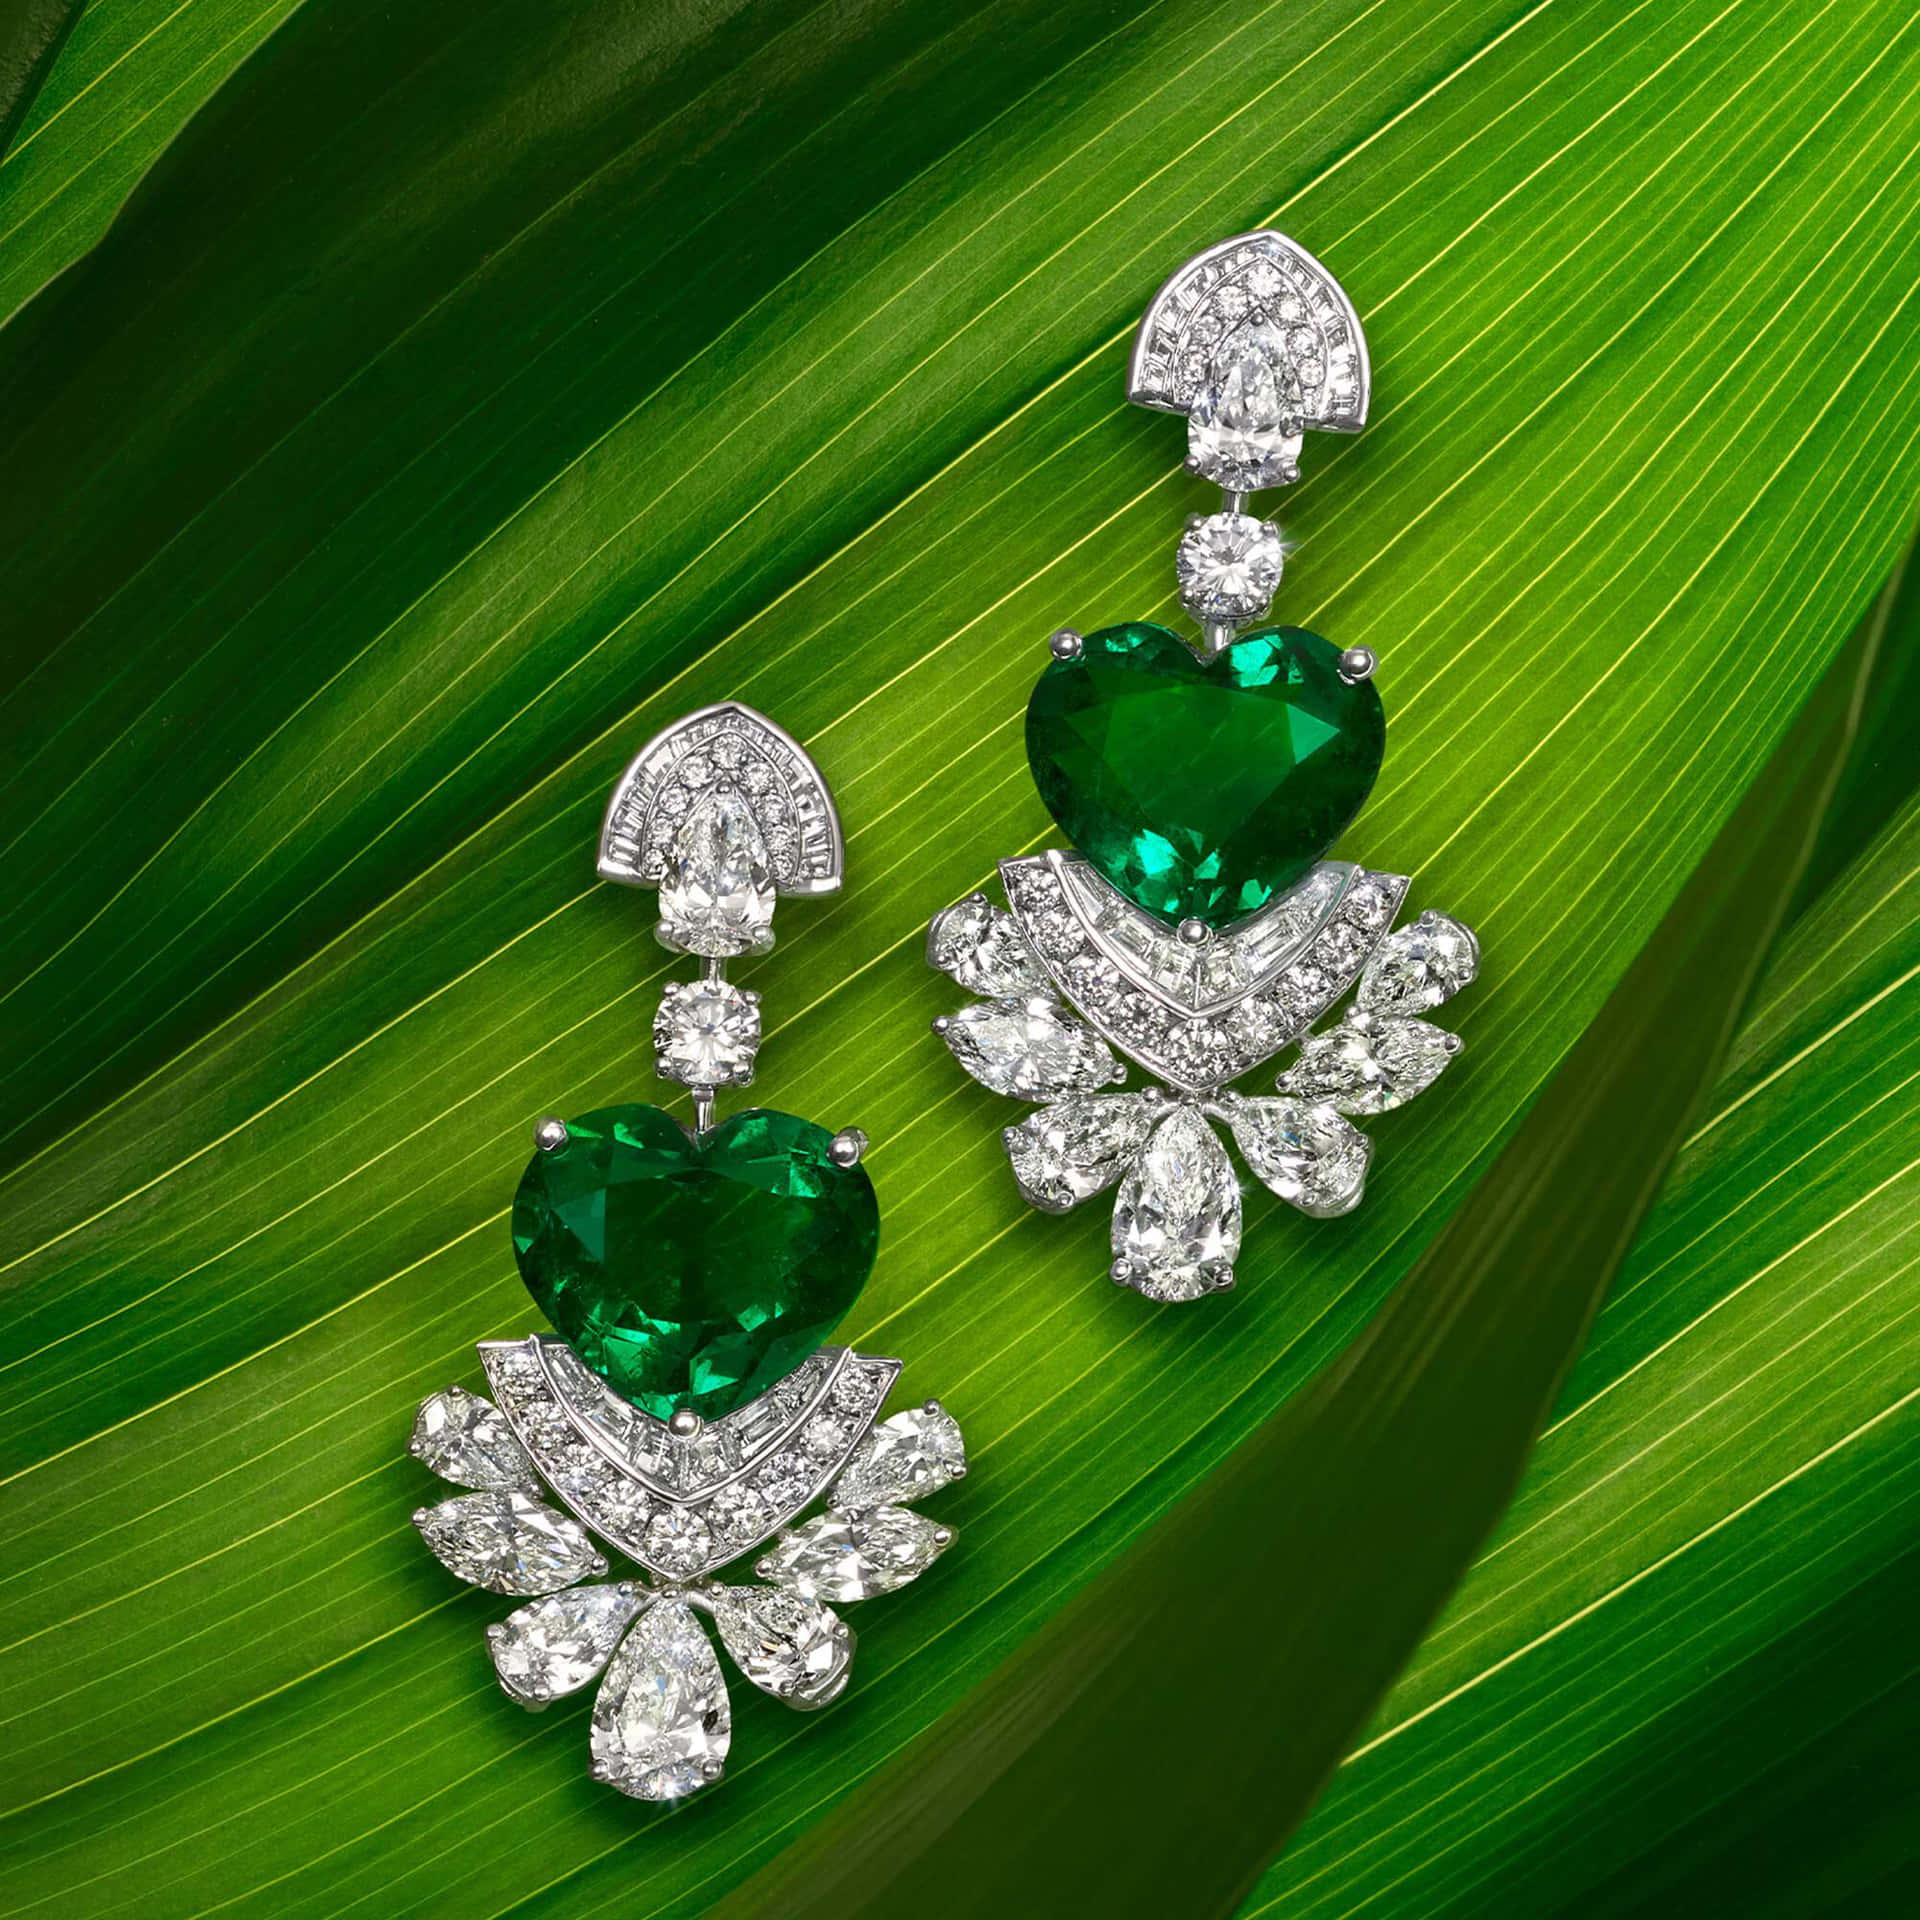 Emerald And Diamond Earrings On Green Leaves